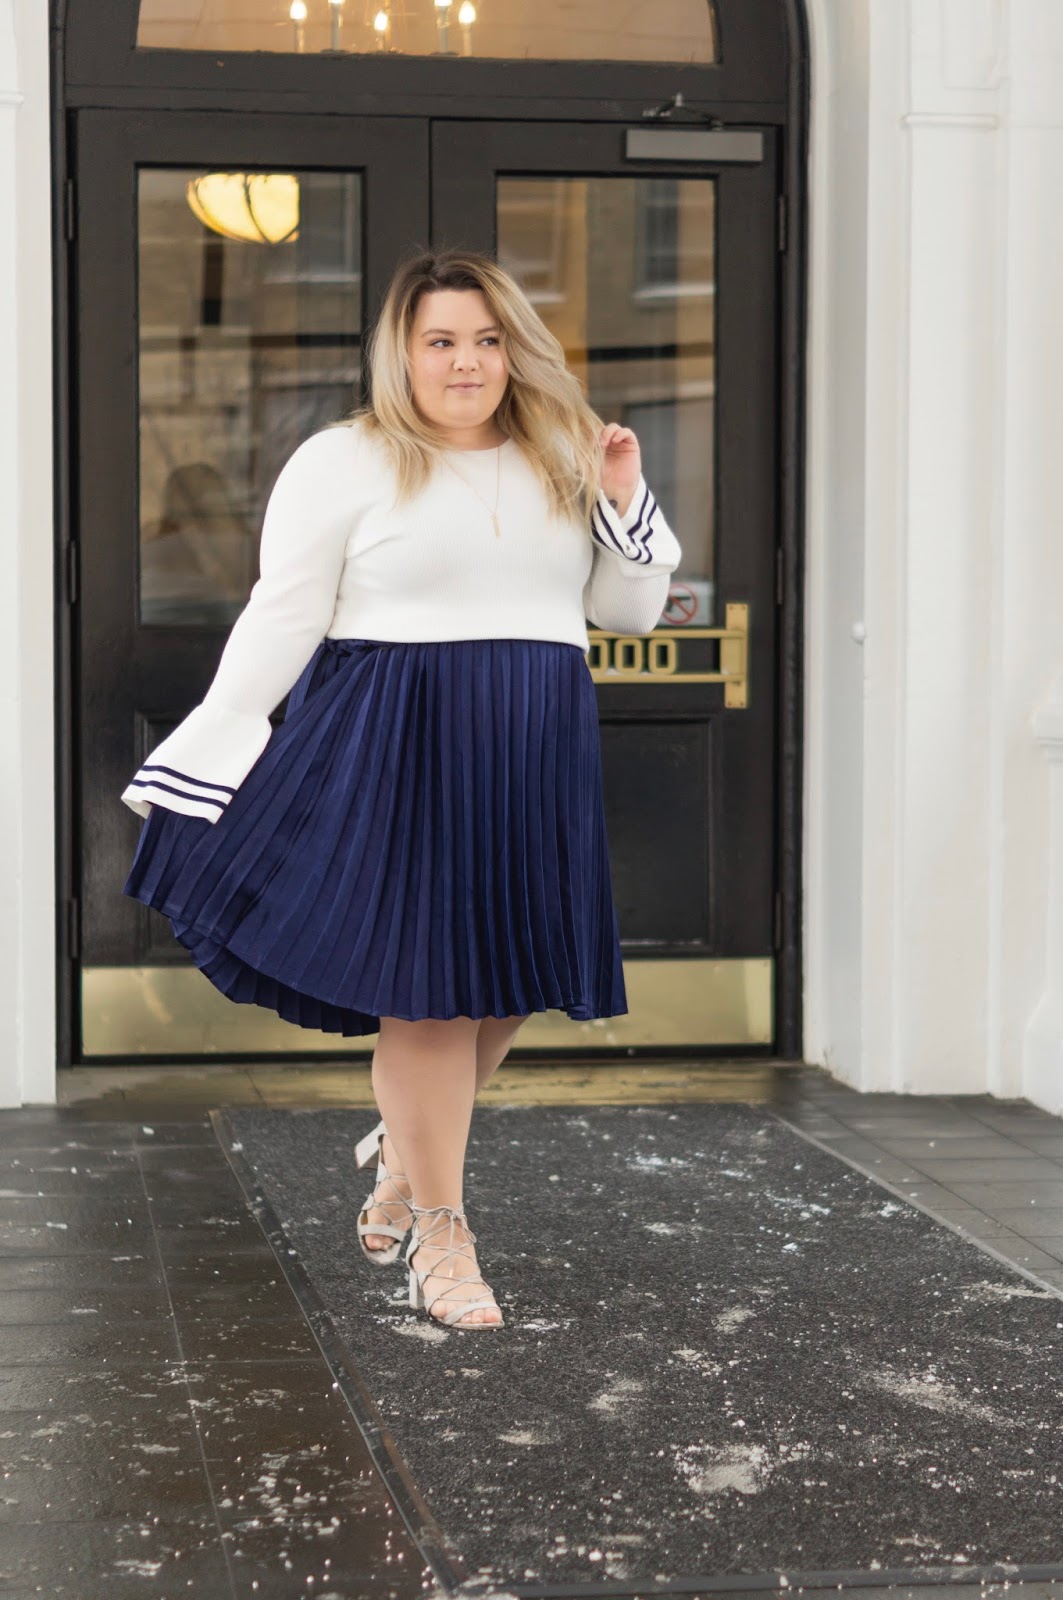 full figured fashion, natalie Craig, natalie in the city, plus size fashion blogger, Chicago plus size fashion blogger, embrace your curves, eff your beauty standards, plus size pleated midi skirt, bell sleeve sweater, affordable plus size clothing, eloquii, eloquii Chicago location